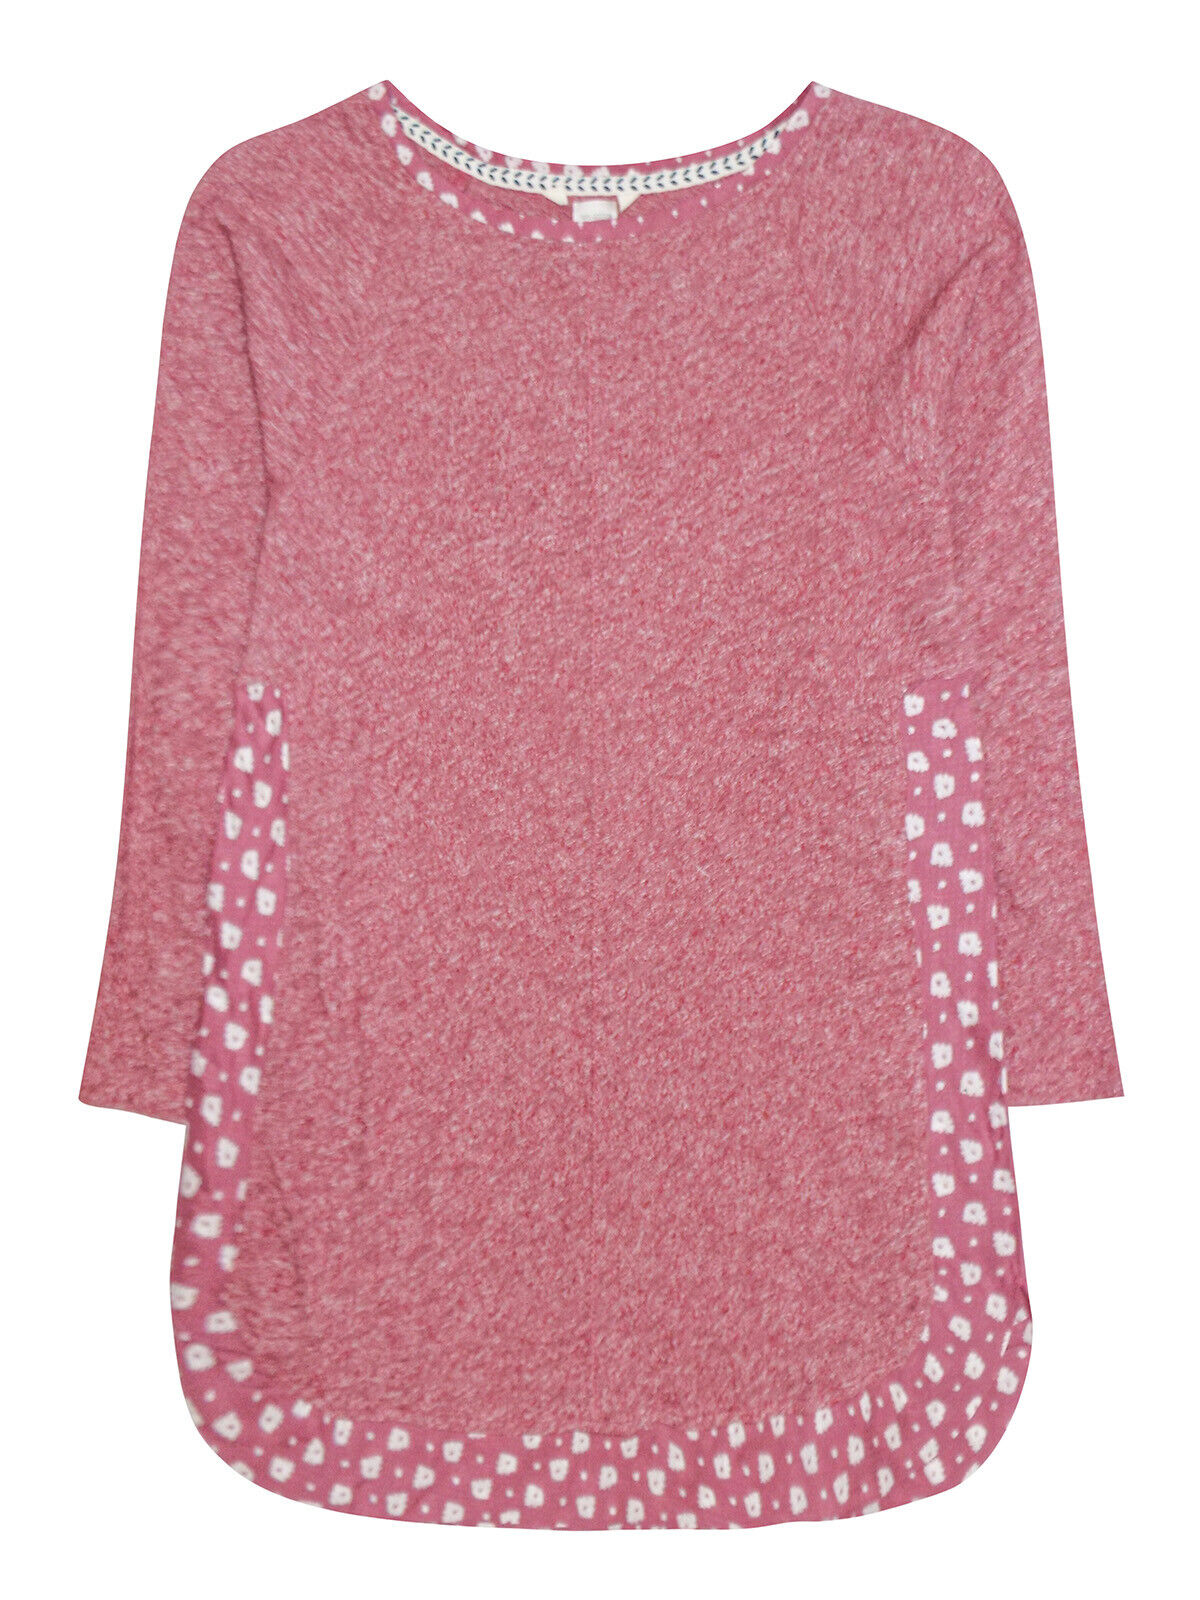 EX WHITE STUFF Rose Selma Jersey T-Shirt in Sizes 12 or 16 RRP £32